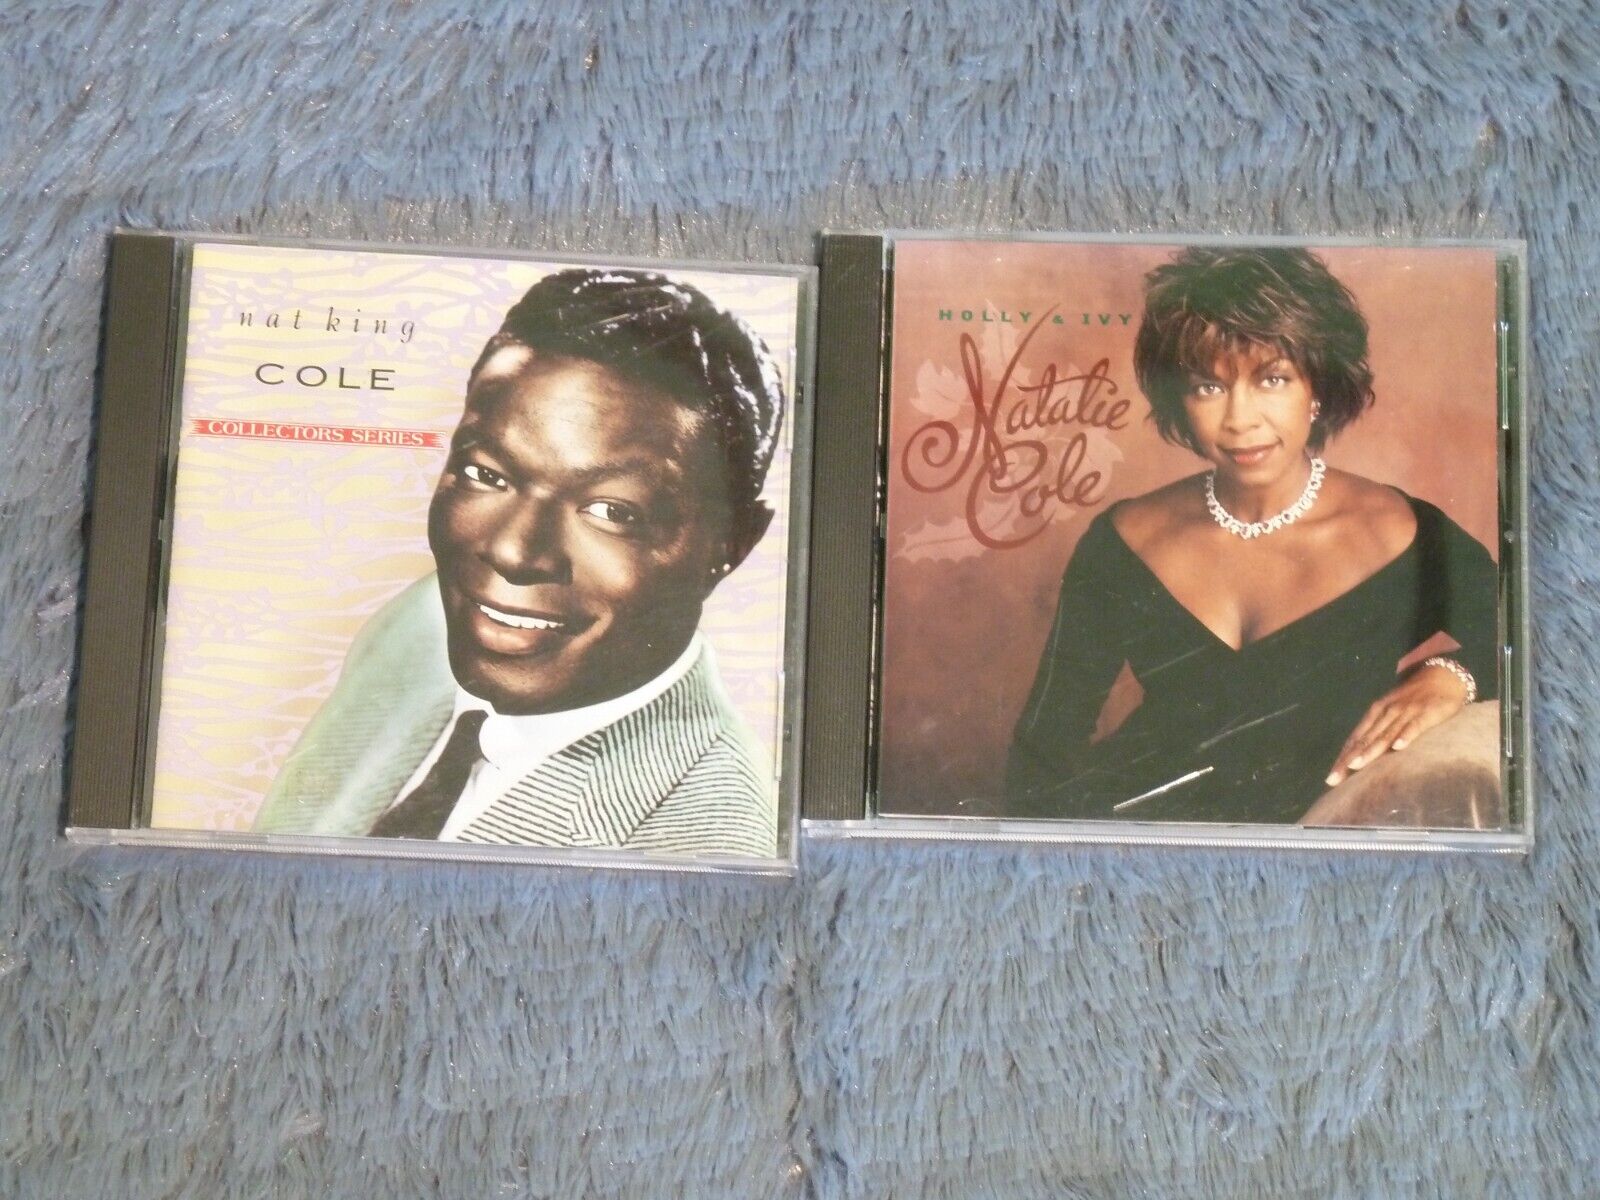 Lot CDs Nat King Cole Collector's Series Natalie Cole Holly & Ivy